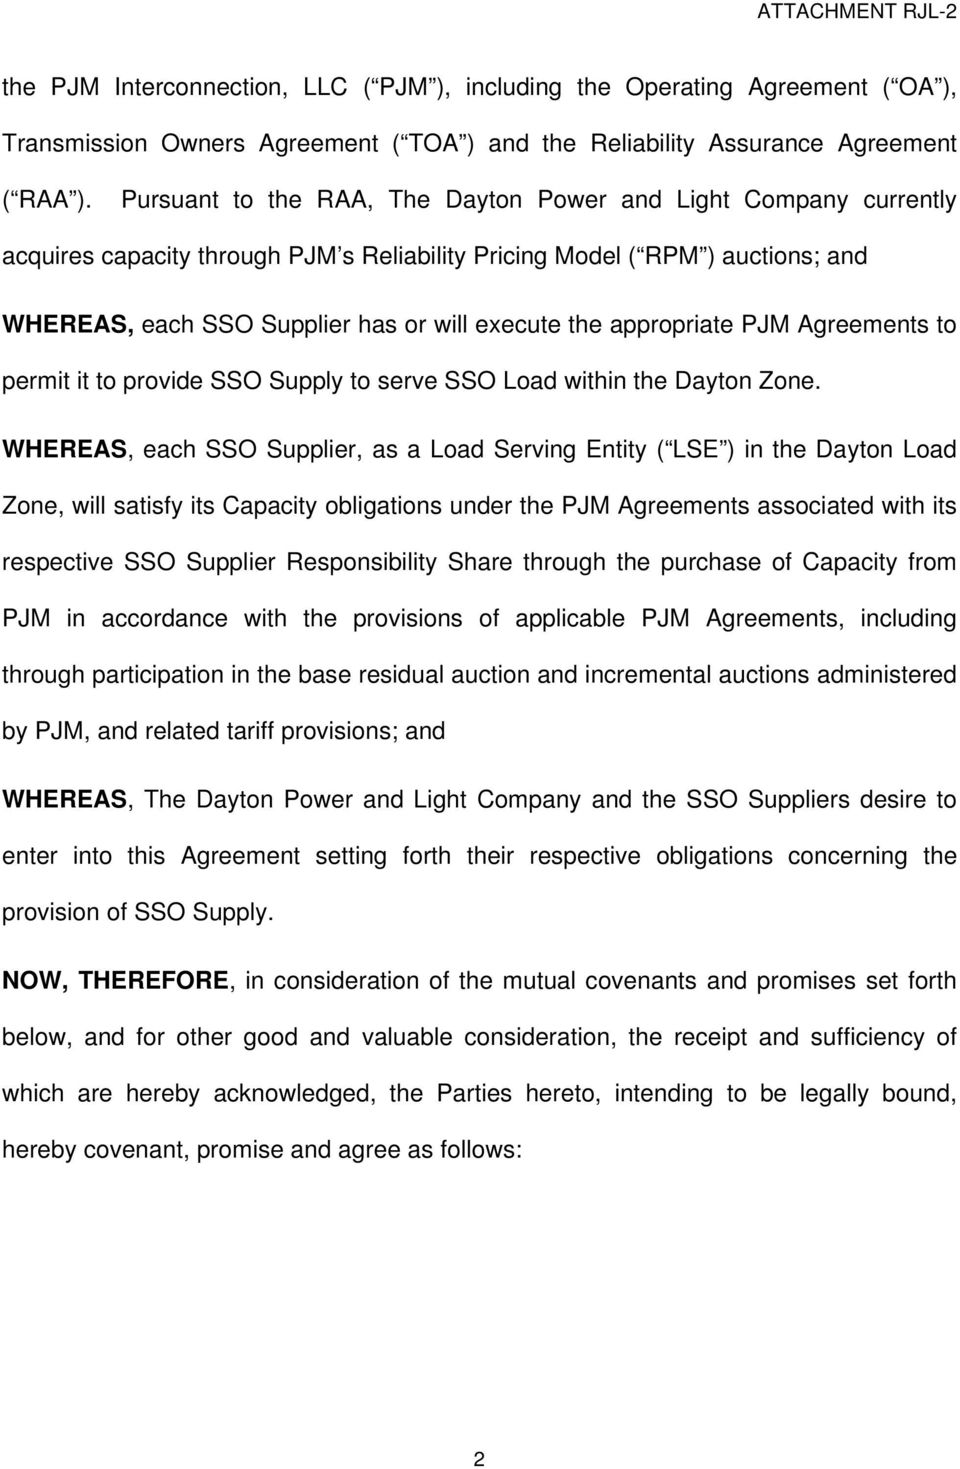 appropriate PJM Agreements to permit it to provide SSO Supply to serve SSO Load within the Dayton Zone.